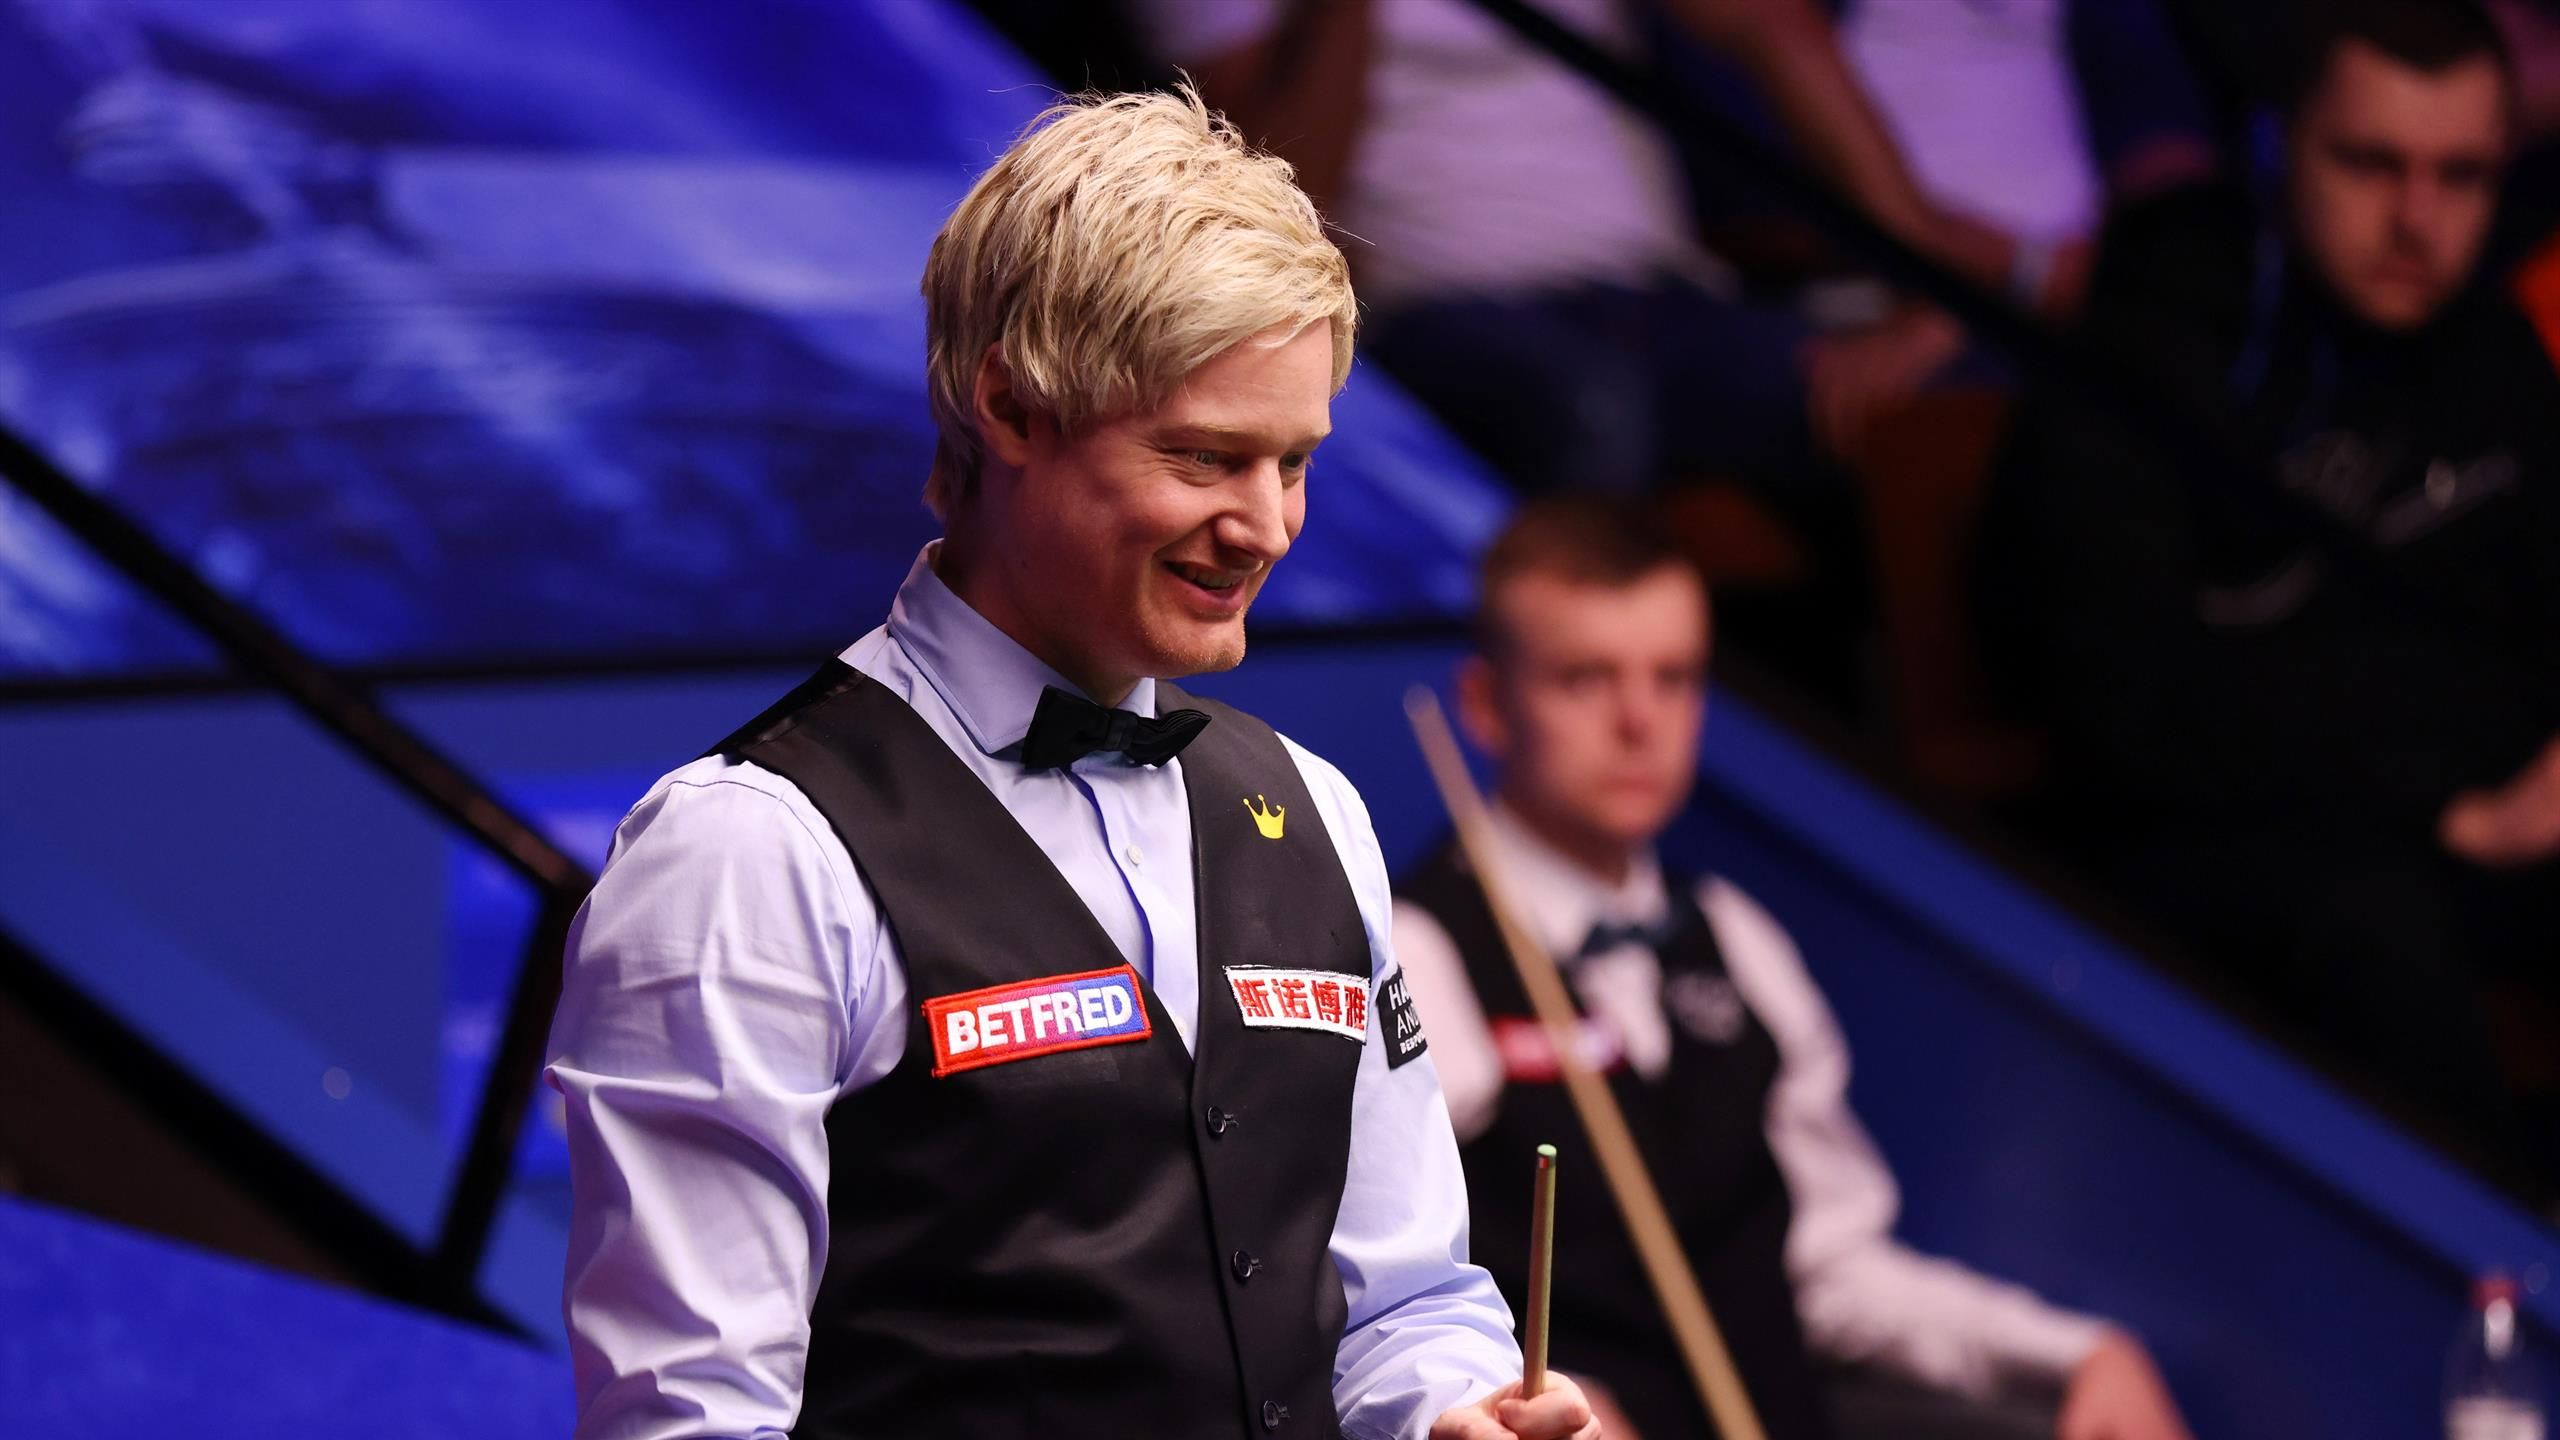 He was floating around in his jeans! - Neil Robertson on facing debutant at World Snooker Championship